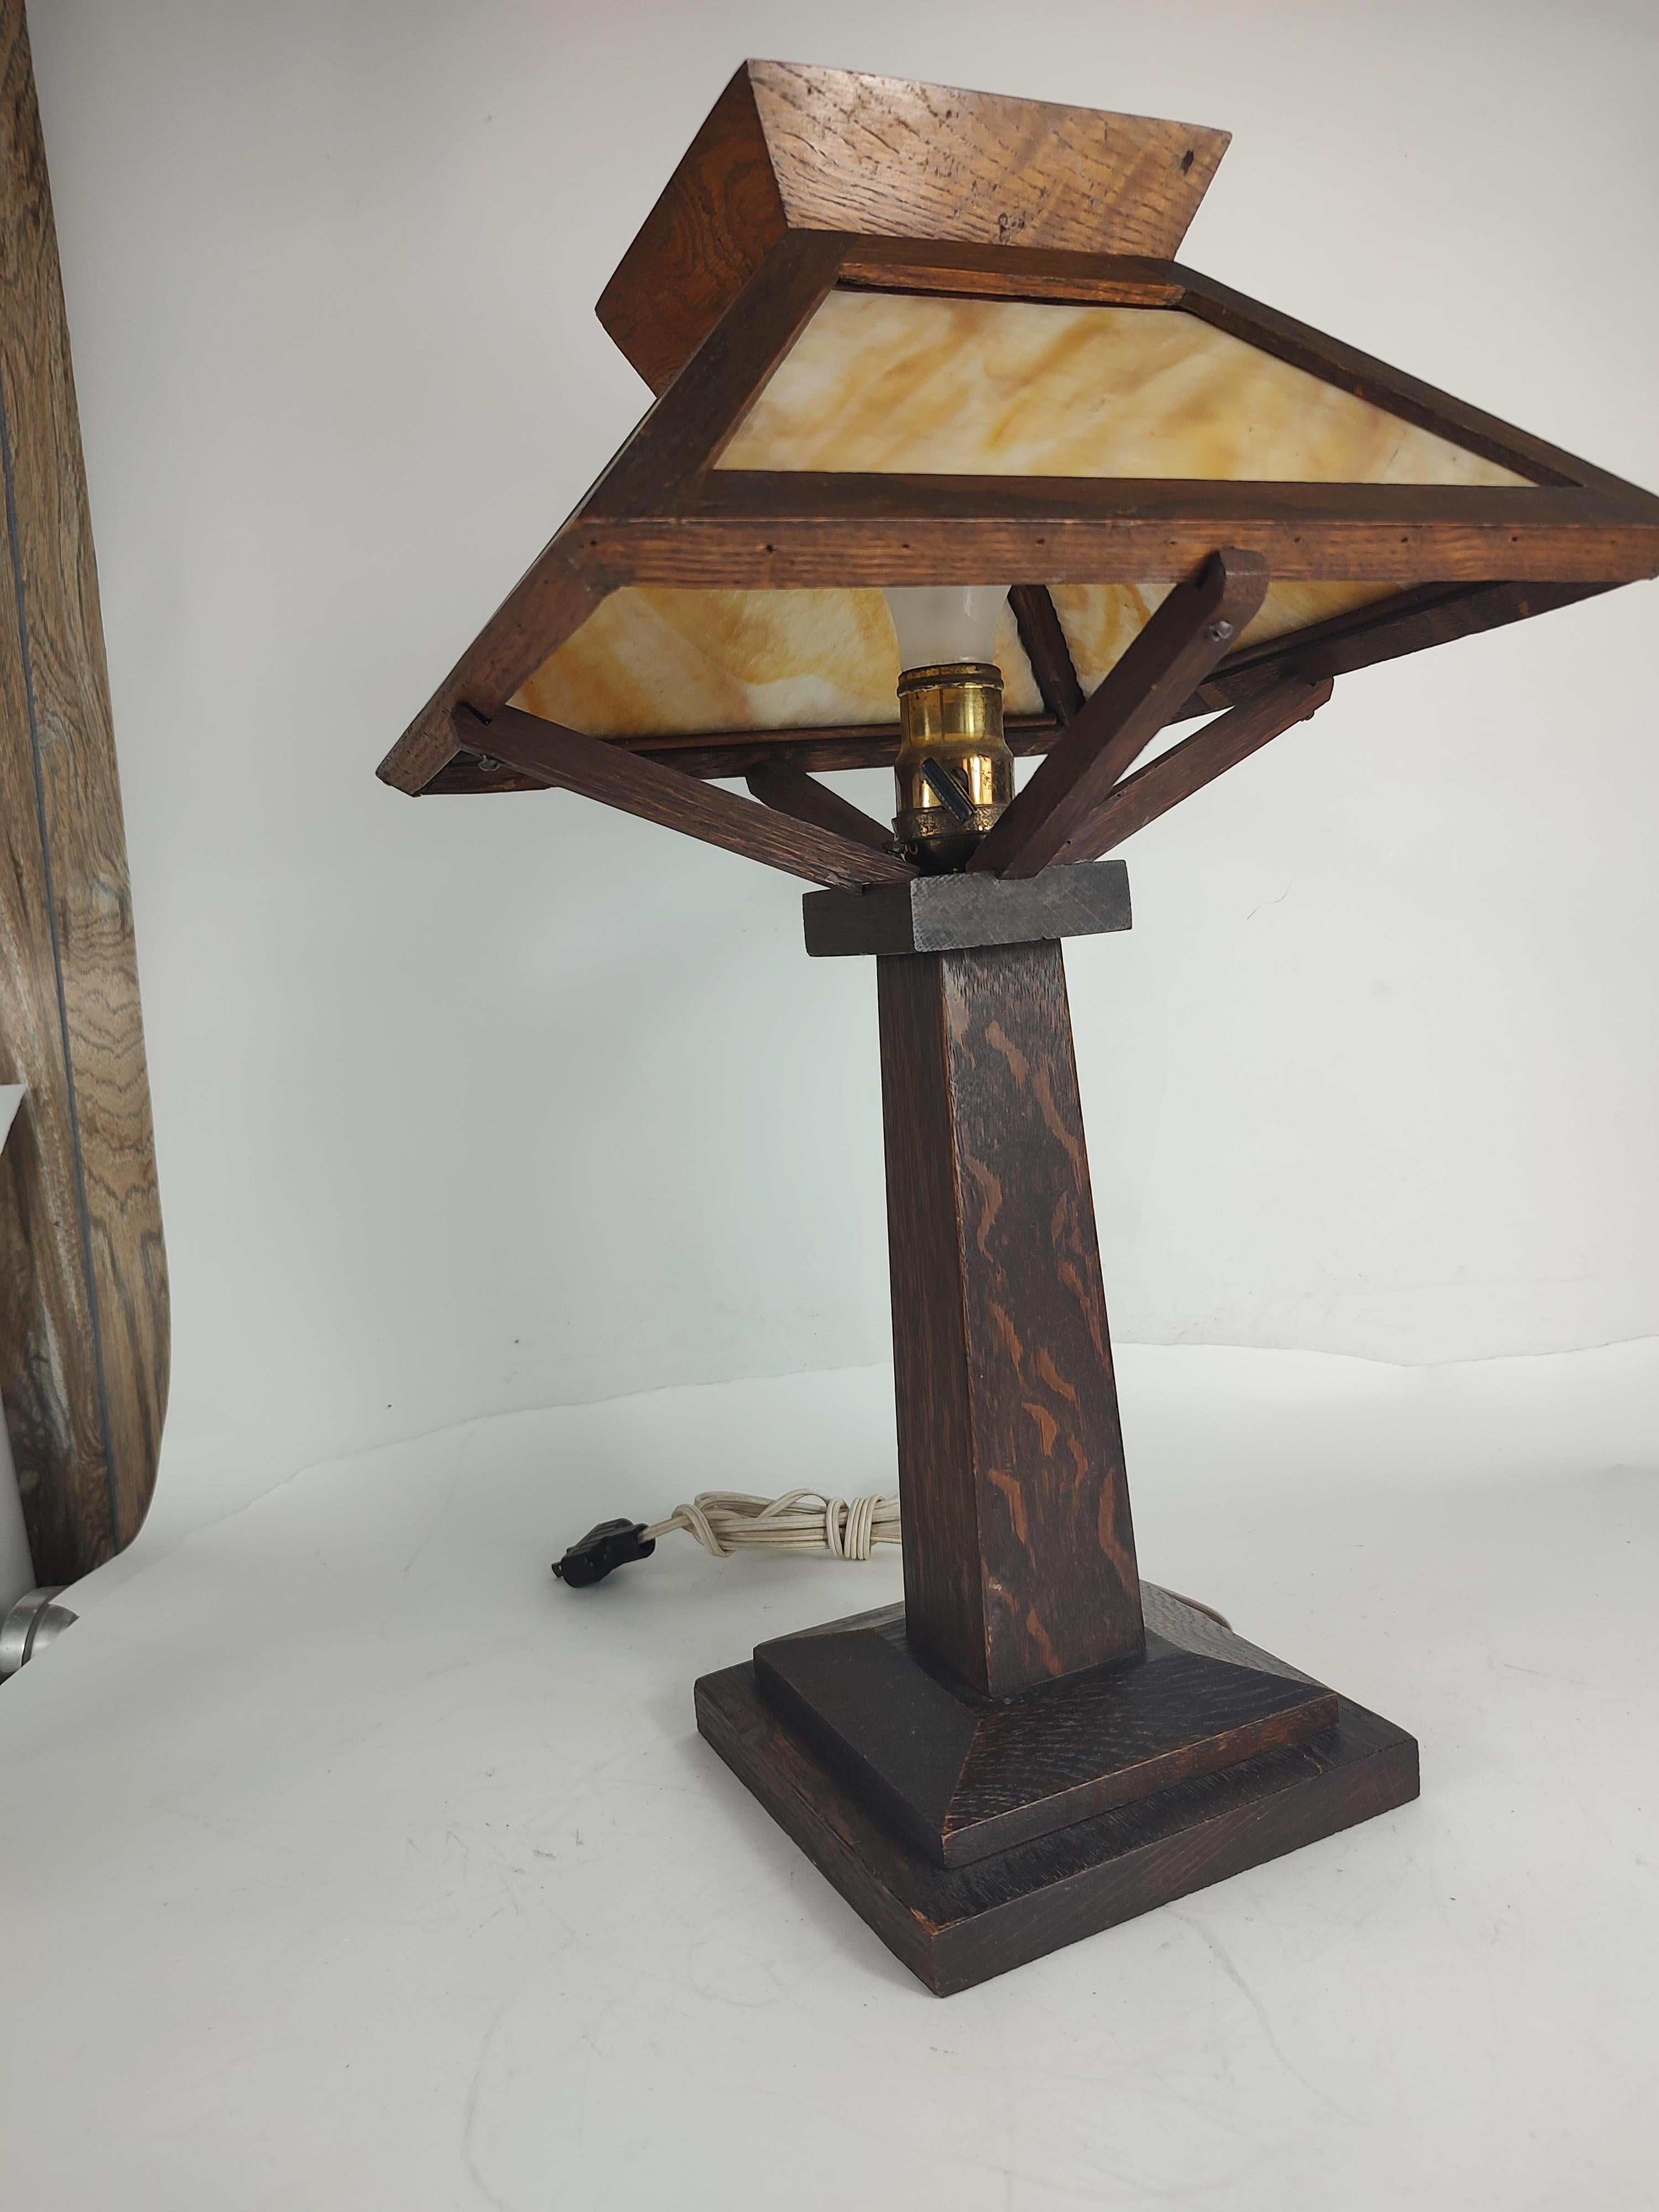 Simple and elegant arts & crafts beige cream colored slag glass table lamp. Quarter sawn oak with a deep stain that shows the grain well. Appears to be totally original and it's in excellent antique condition with minimal wear. Wiring and socket are